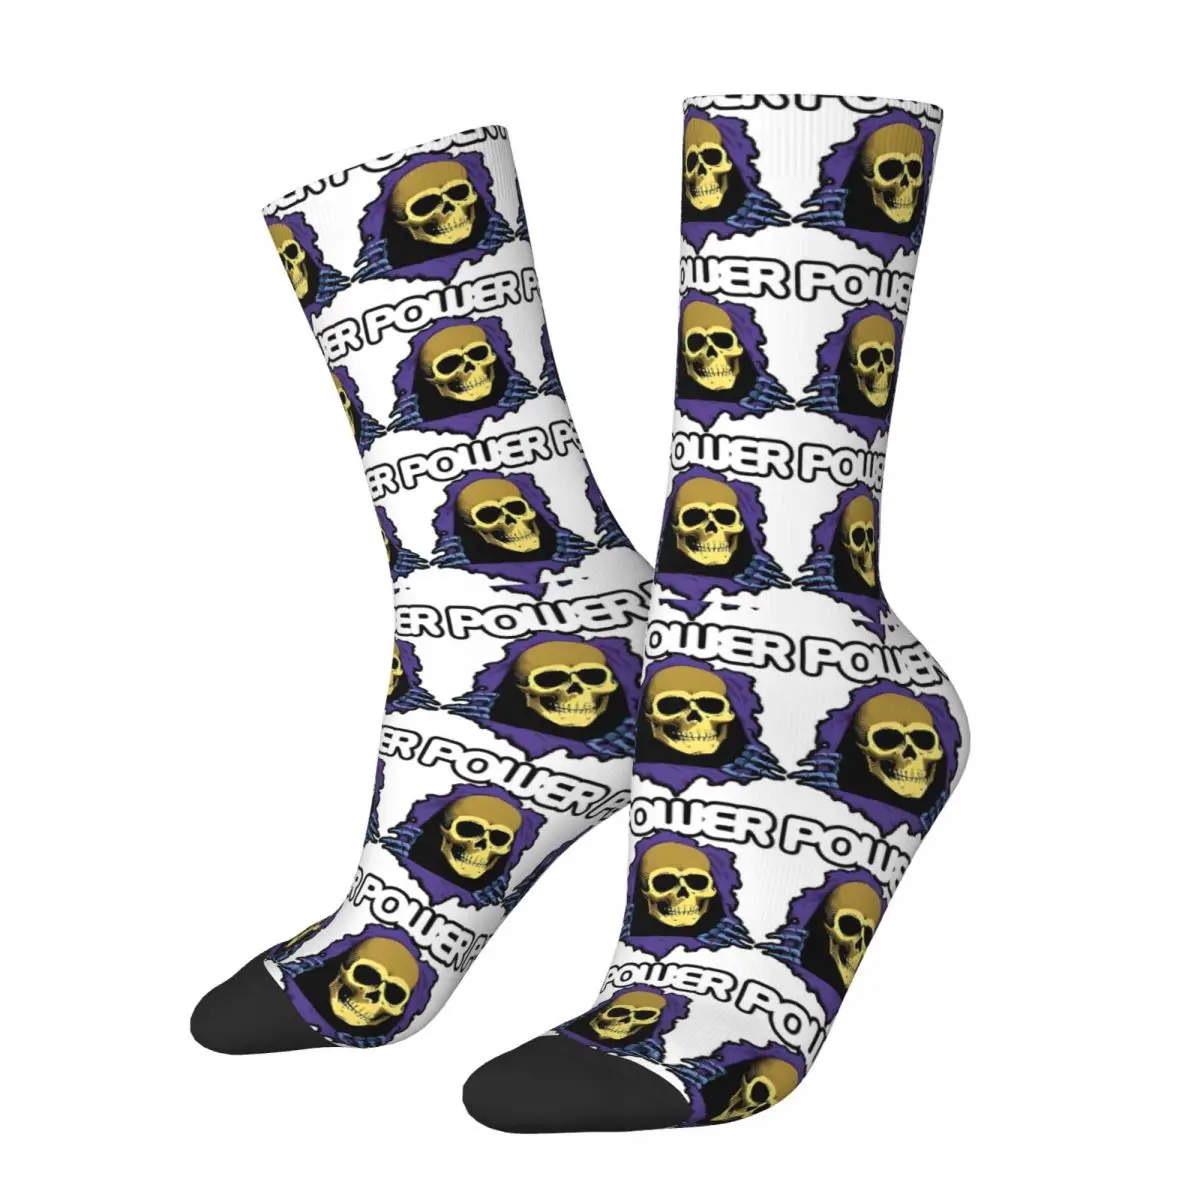 

Men's Socks Skate Vintage Harajuku He-Man and the Masters of the Universe Hip Hop Casual Crew Crazy Sock Gift Pattern Printed